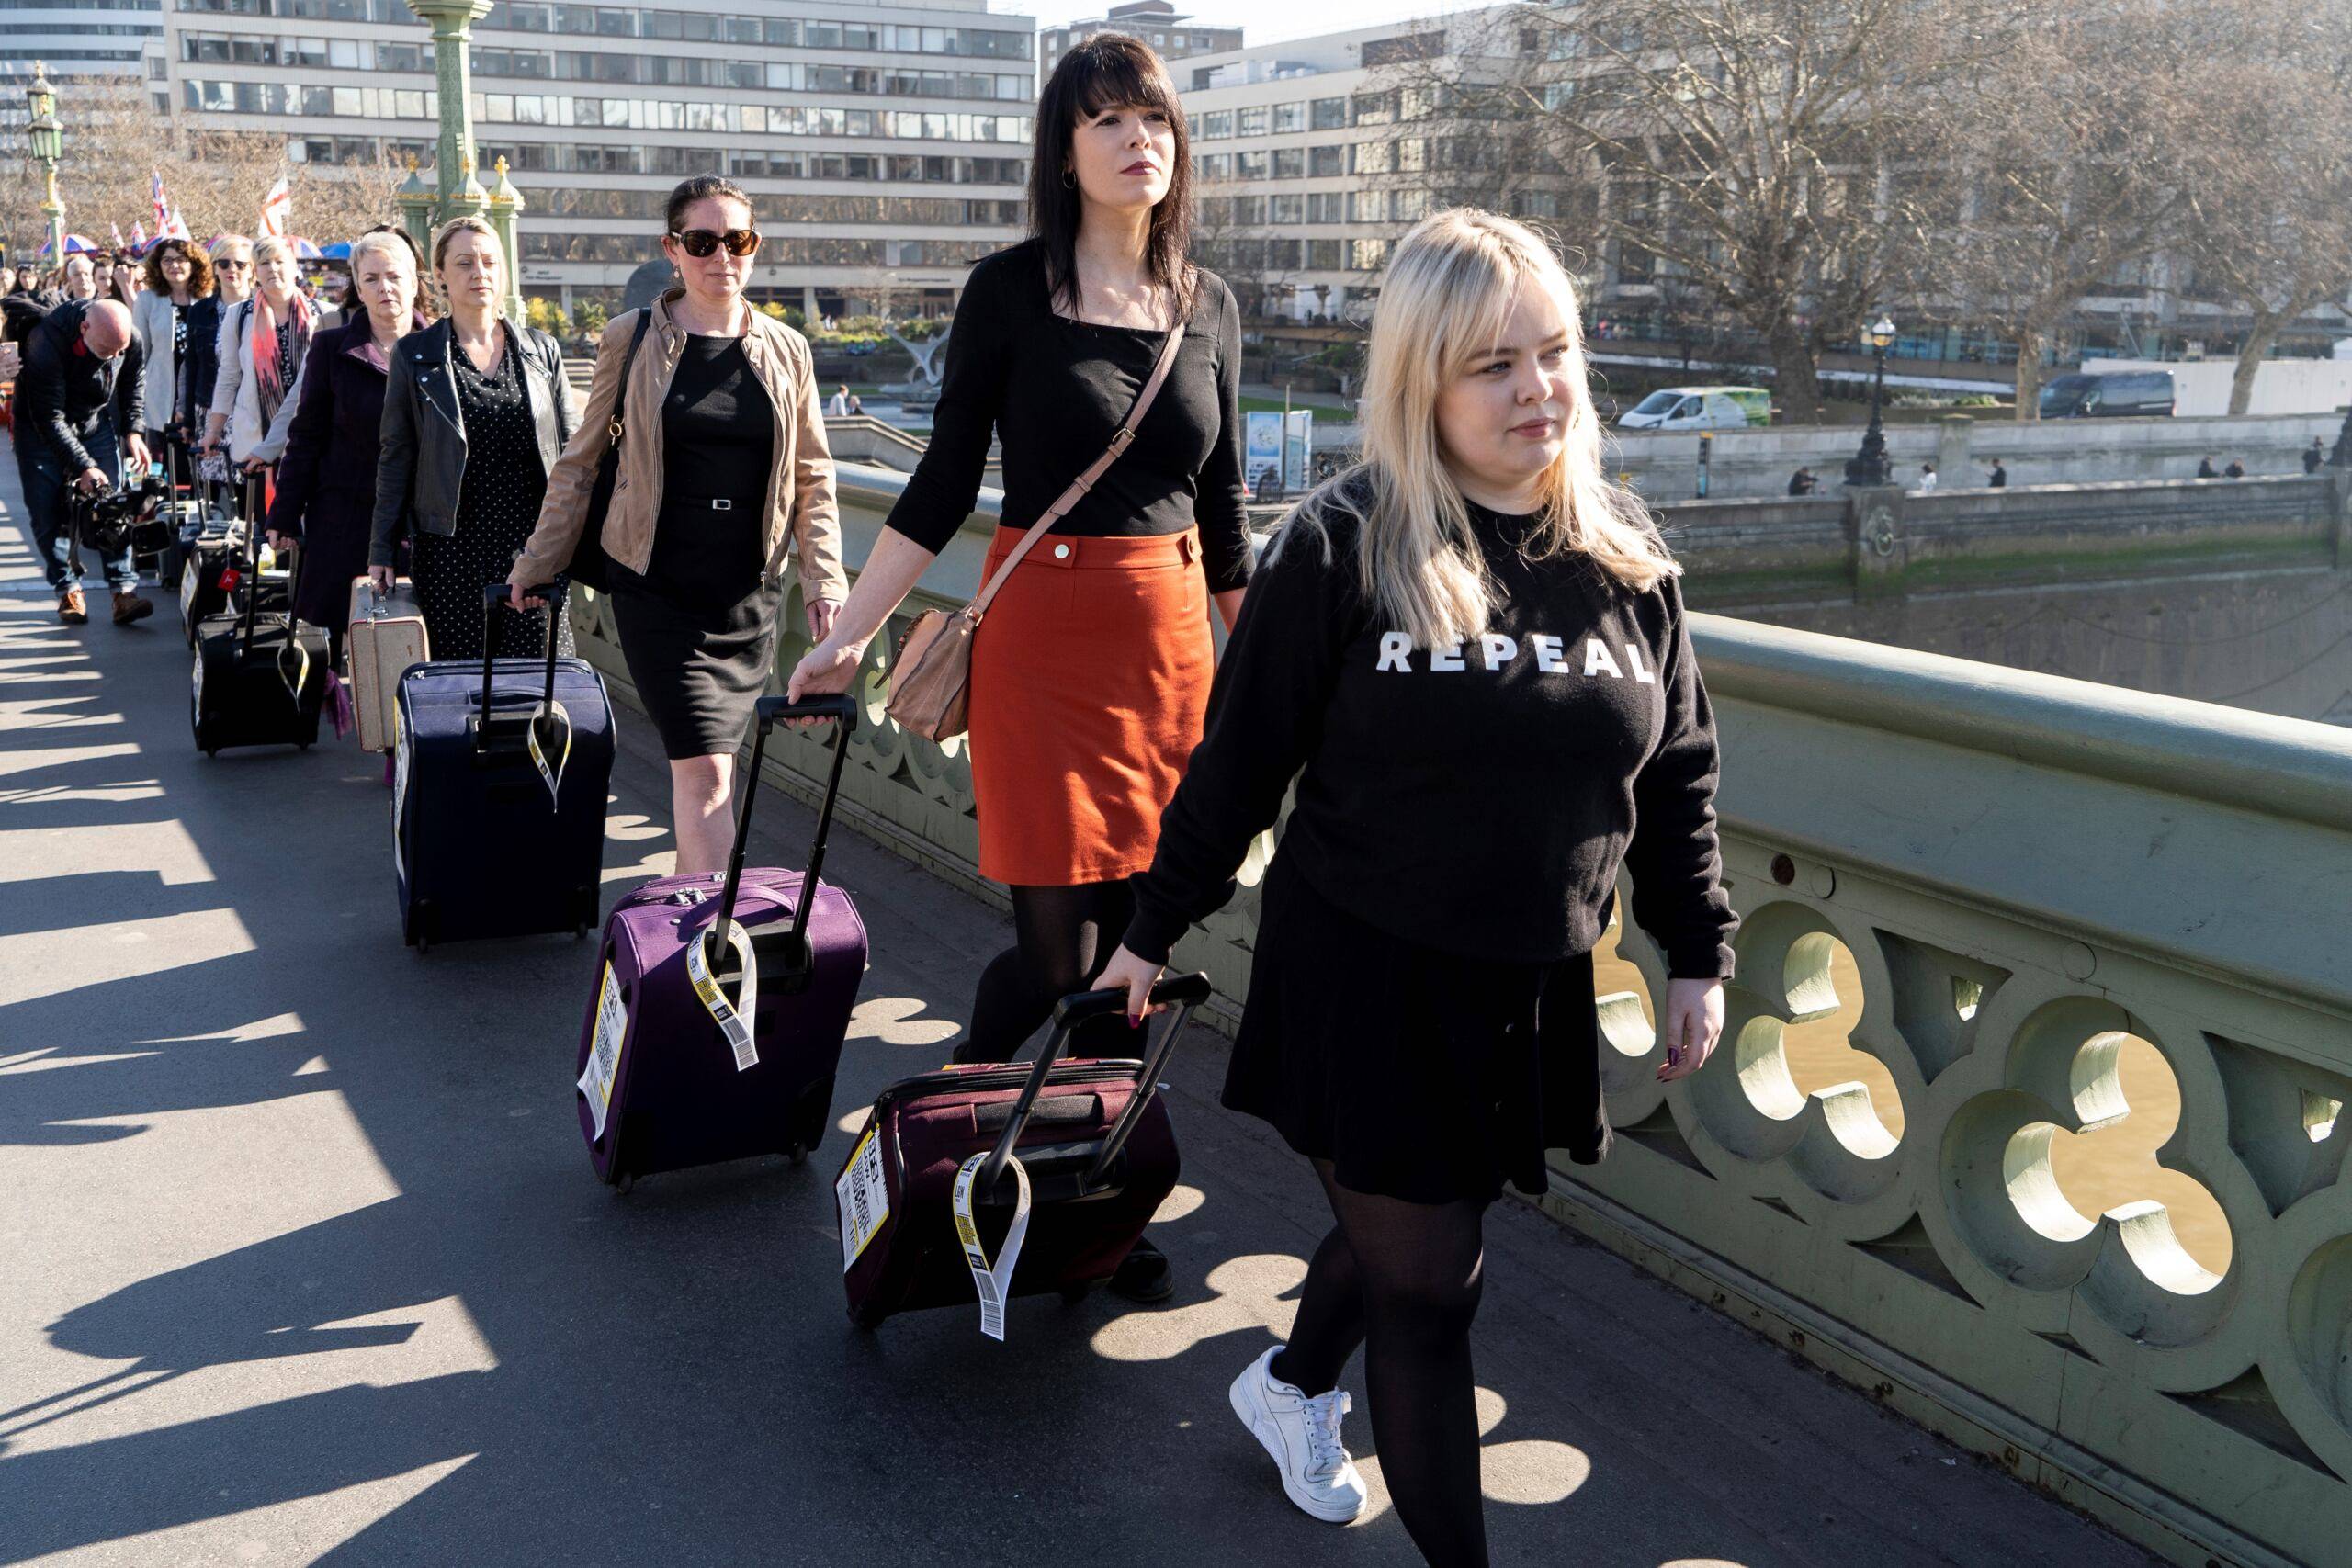 Demonstrators pull suitcases to symbolise the women who travel from Northern Ireland to Great Britain for a termination, as they take part in a protest calling for change to Northern Ireland's abortion laws, during a protest in central London on February 26, 2019. (Photo by Niklas HALLE'N / AFP)